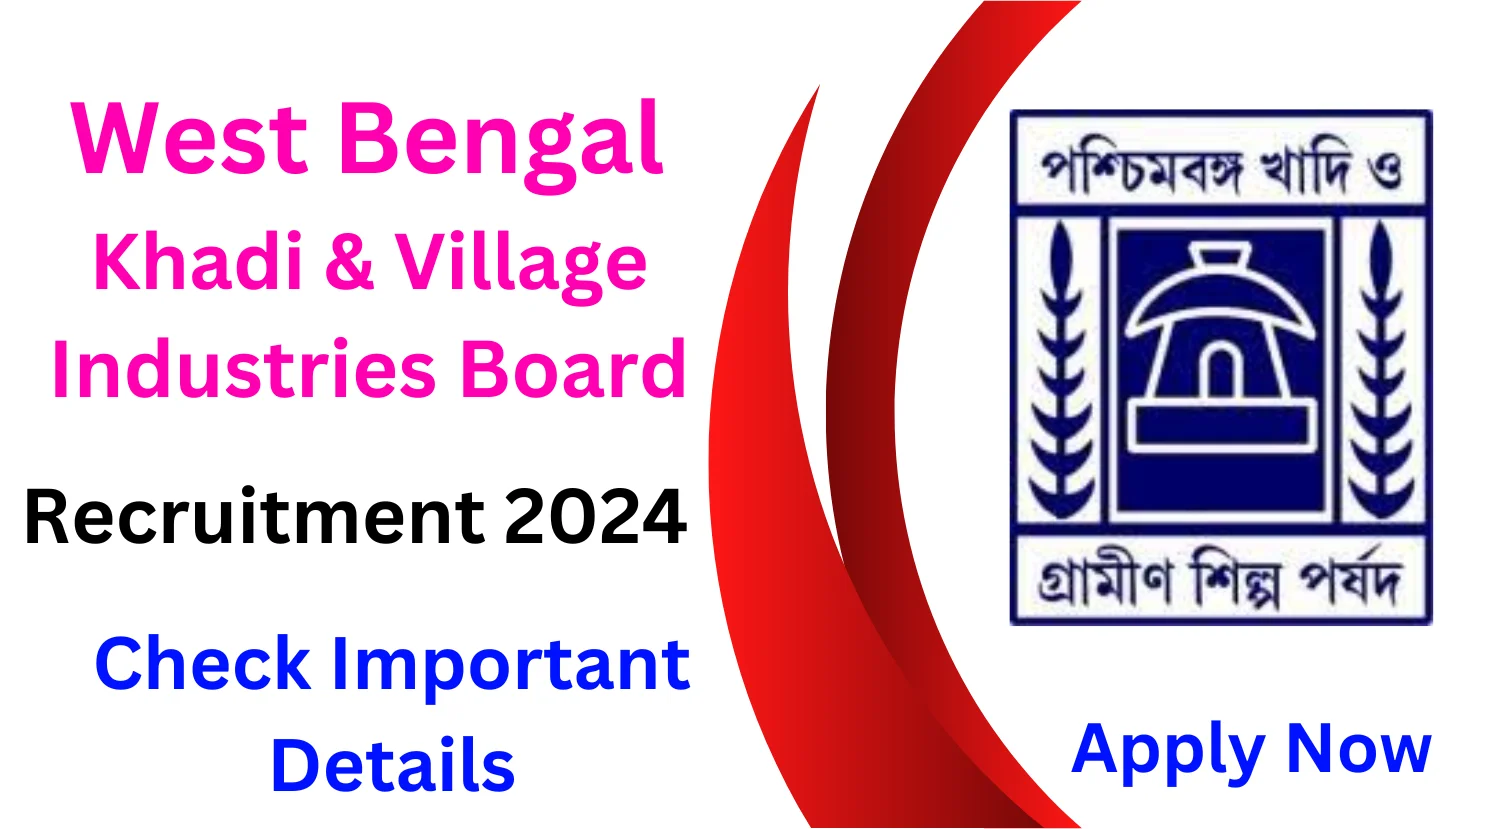 West Bengal Khadi Village Industries Board Recruitment 2024 Notification Out